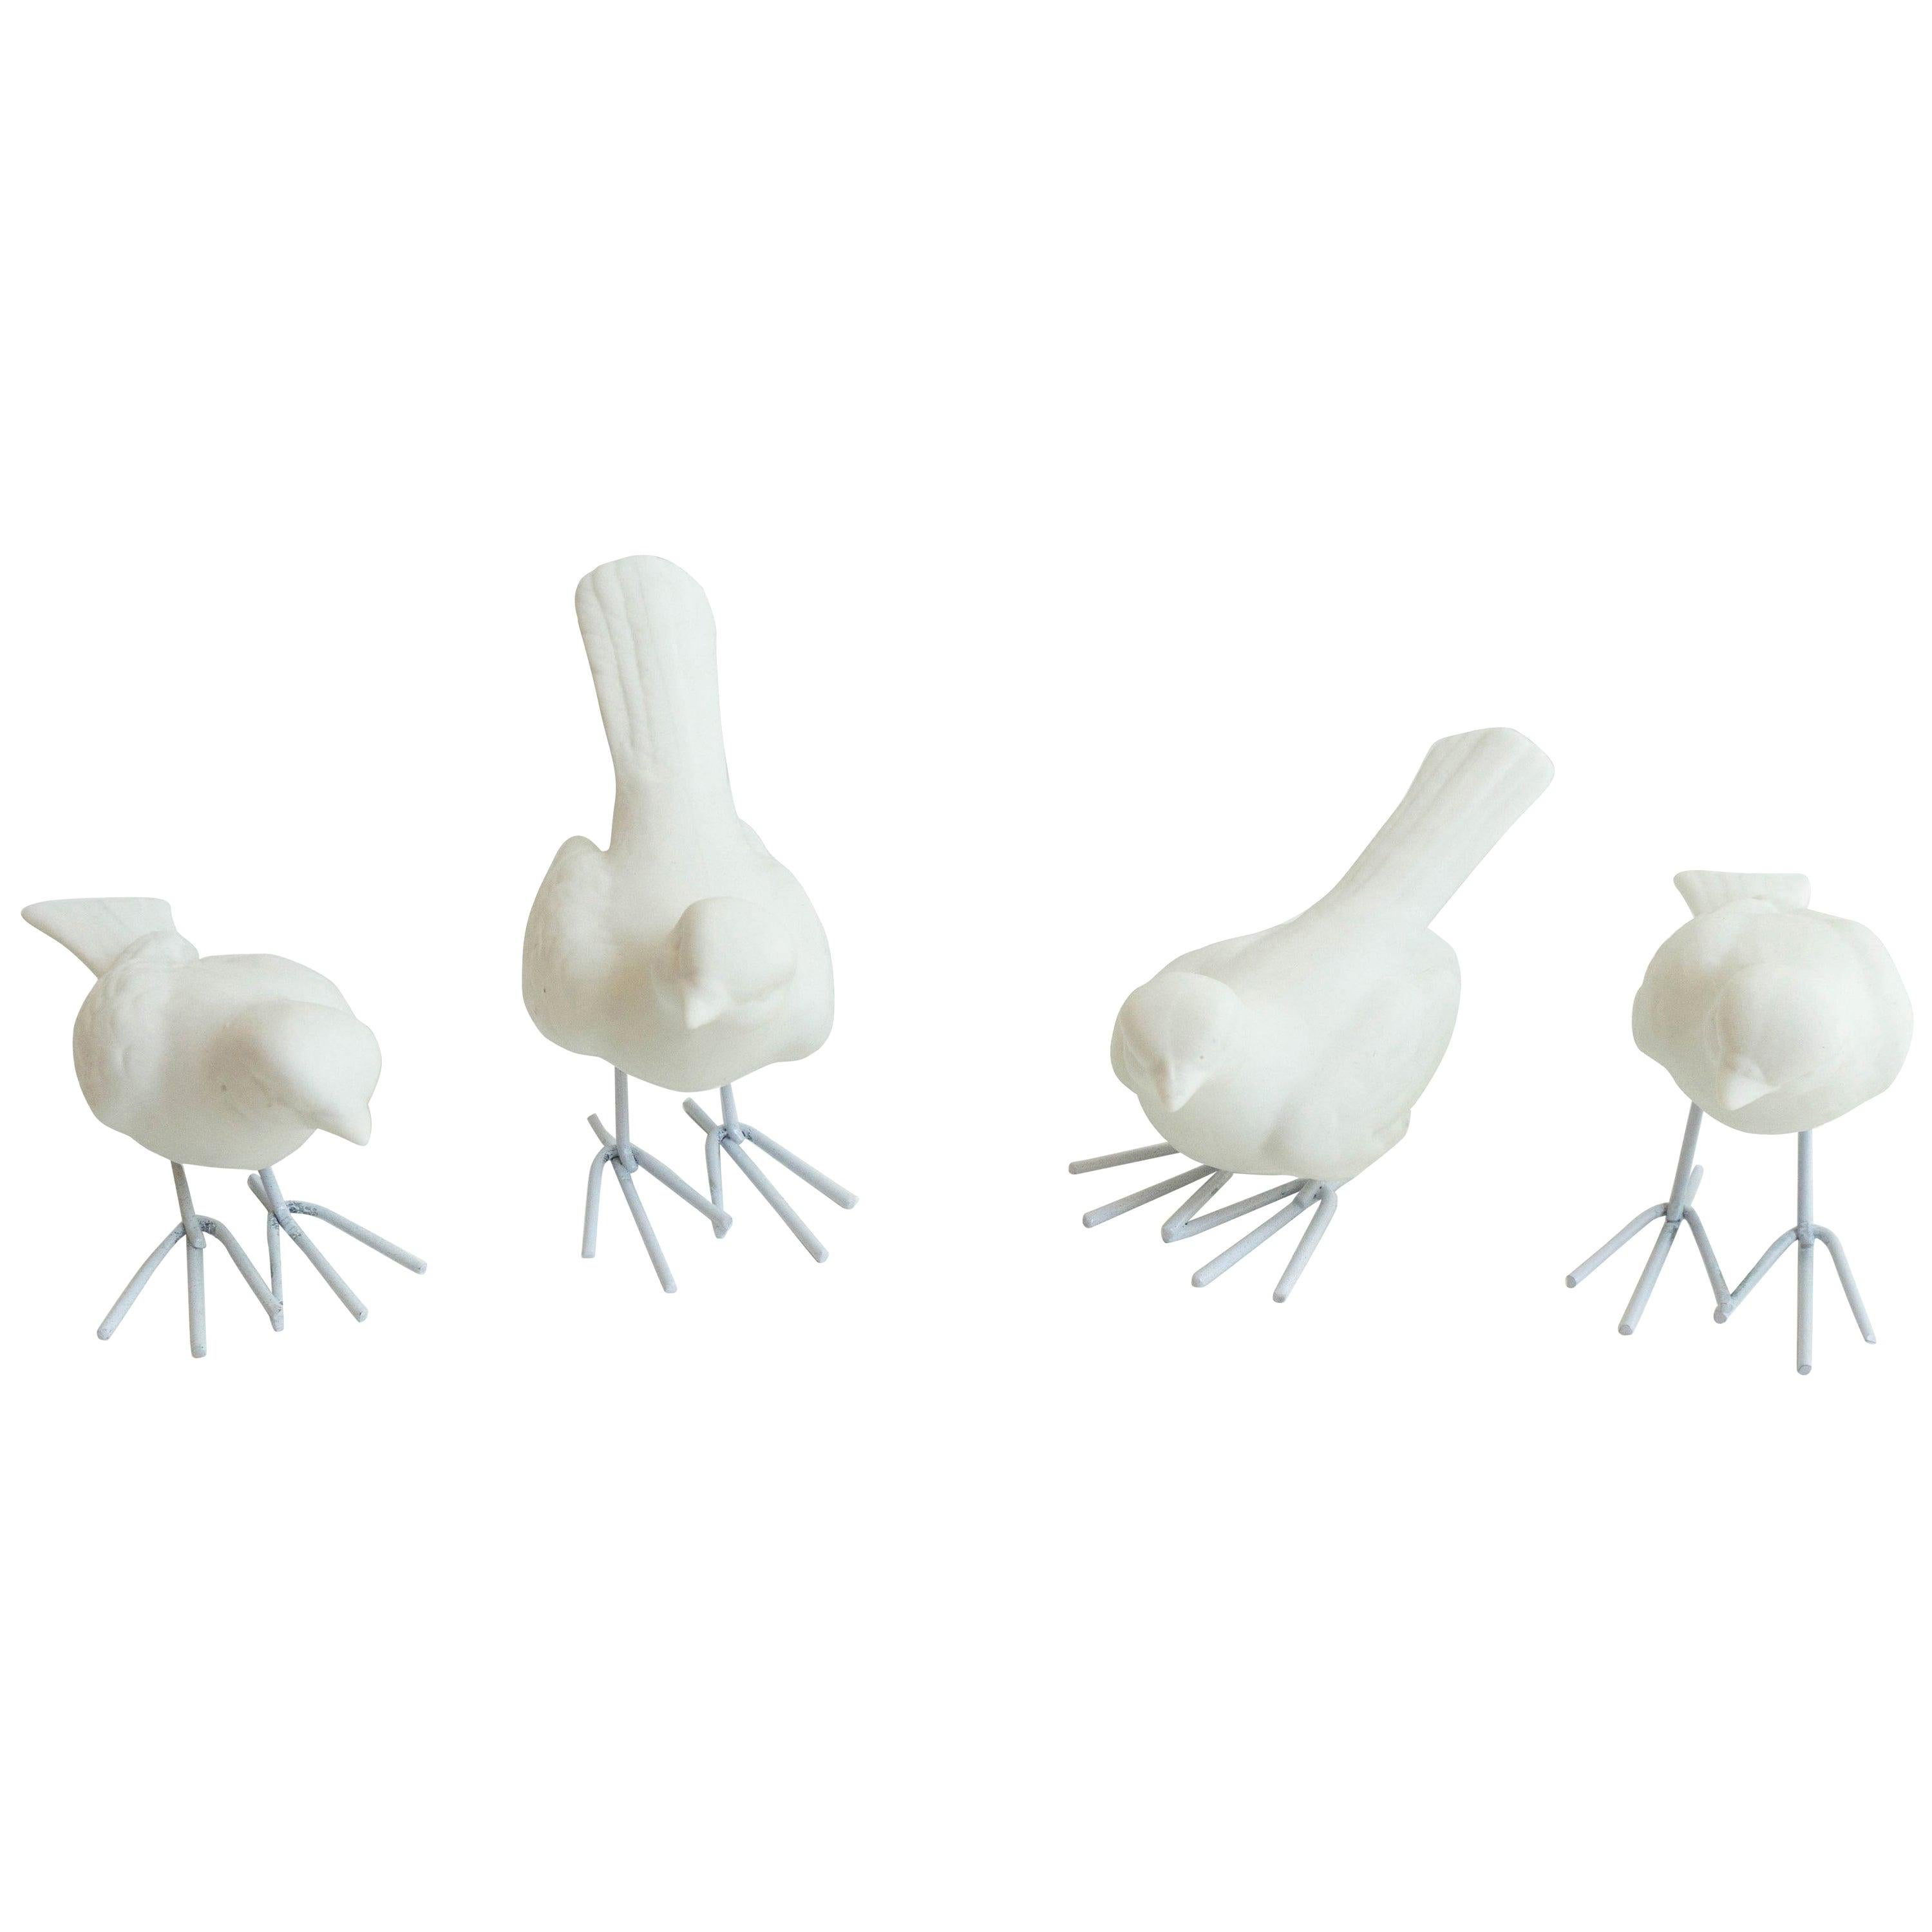 Set of 4 Unglazed White Porcelain Birds, Starlings supported by White Iron Legs  For Sale